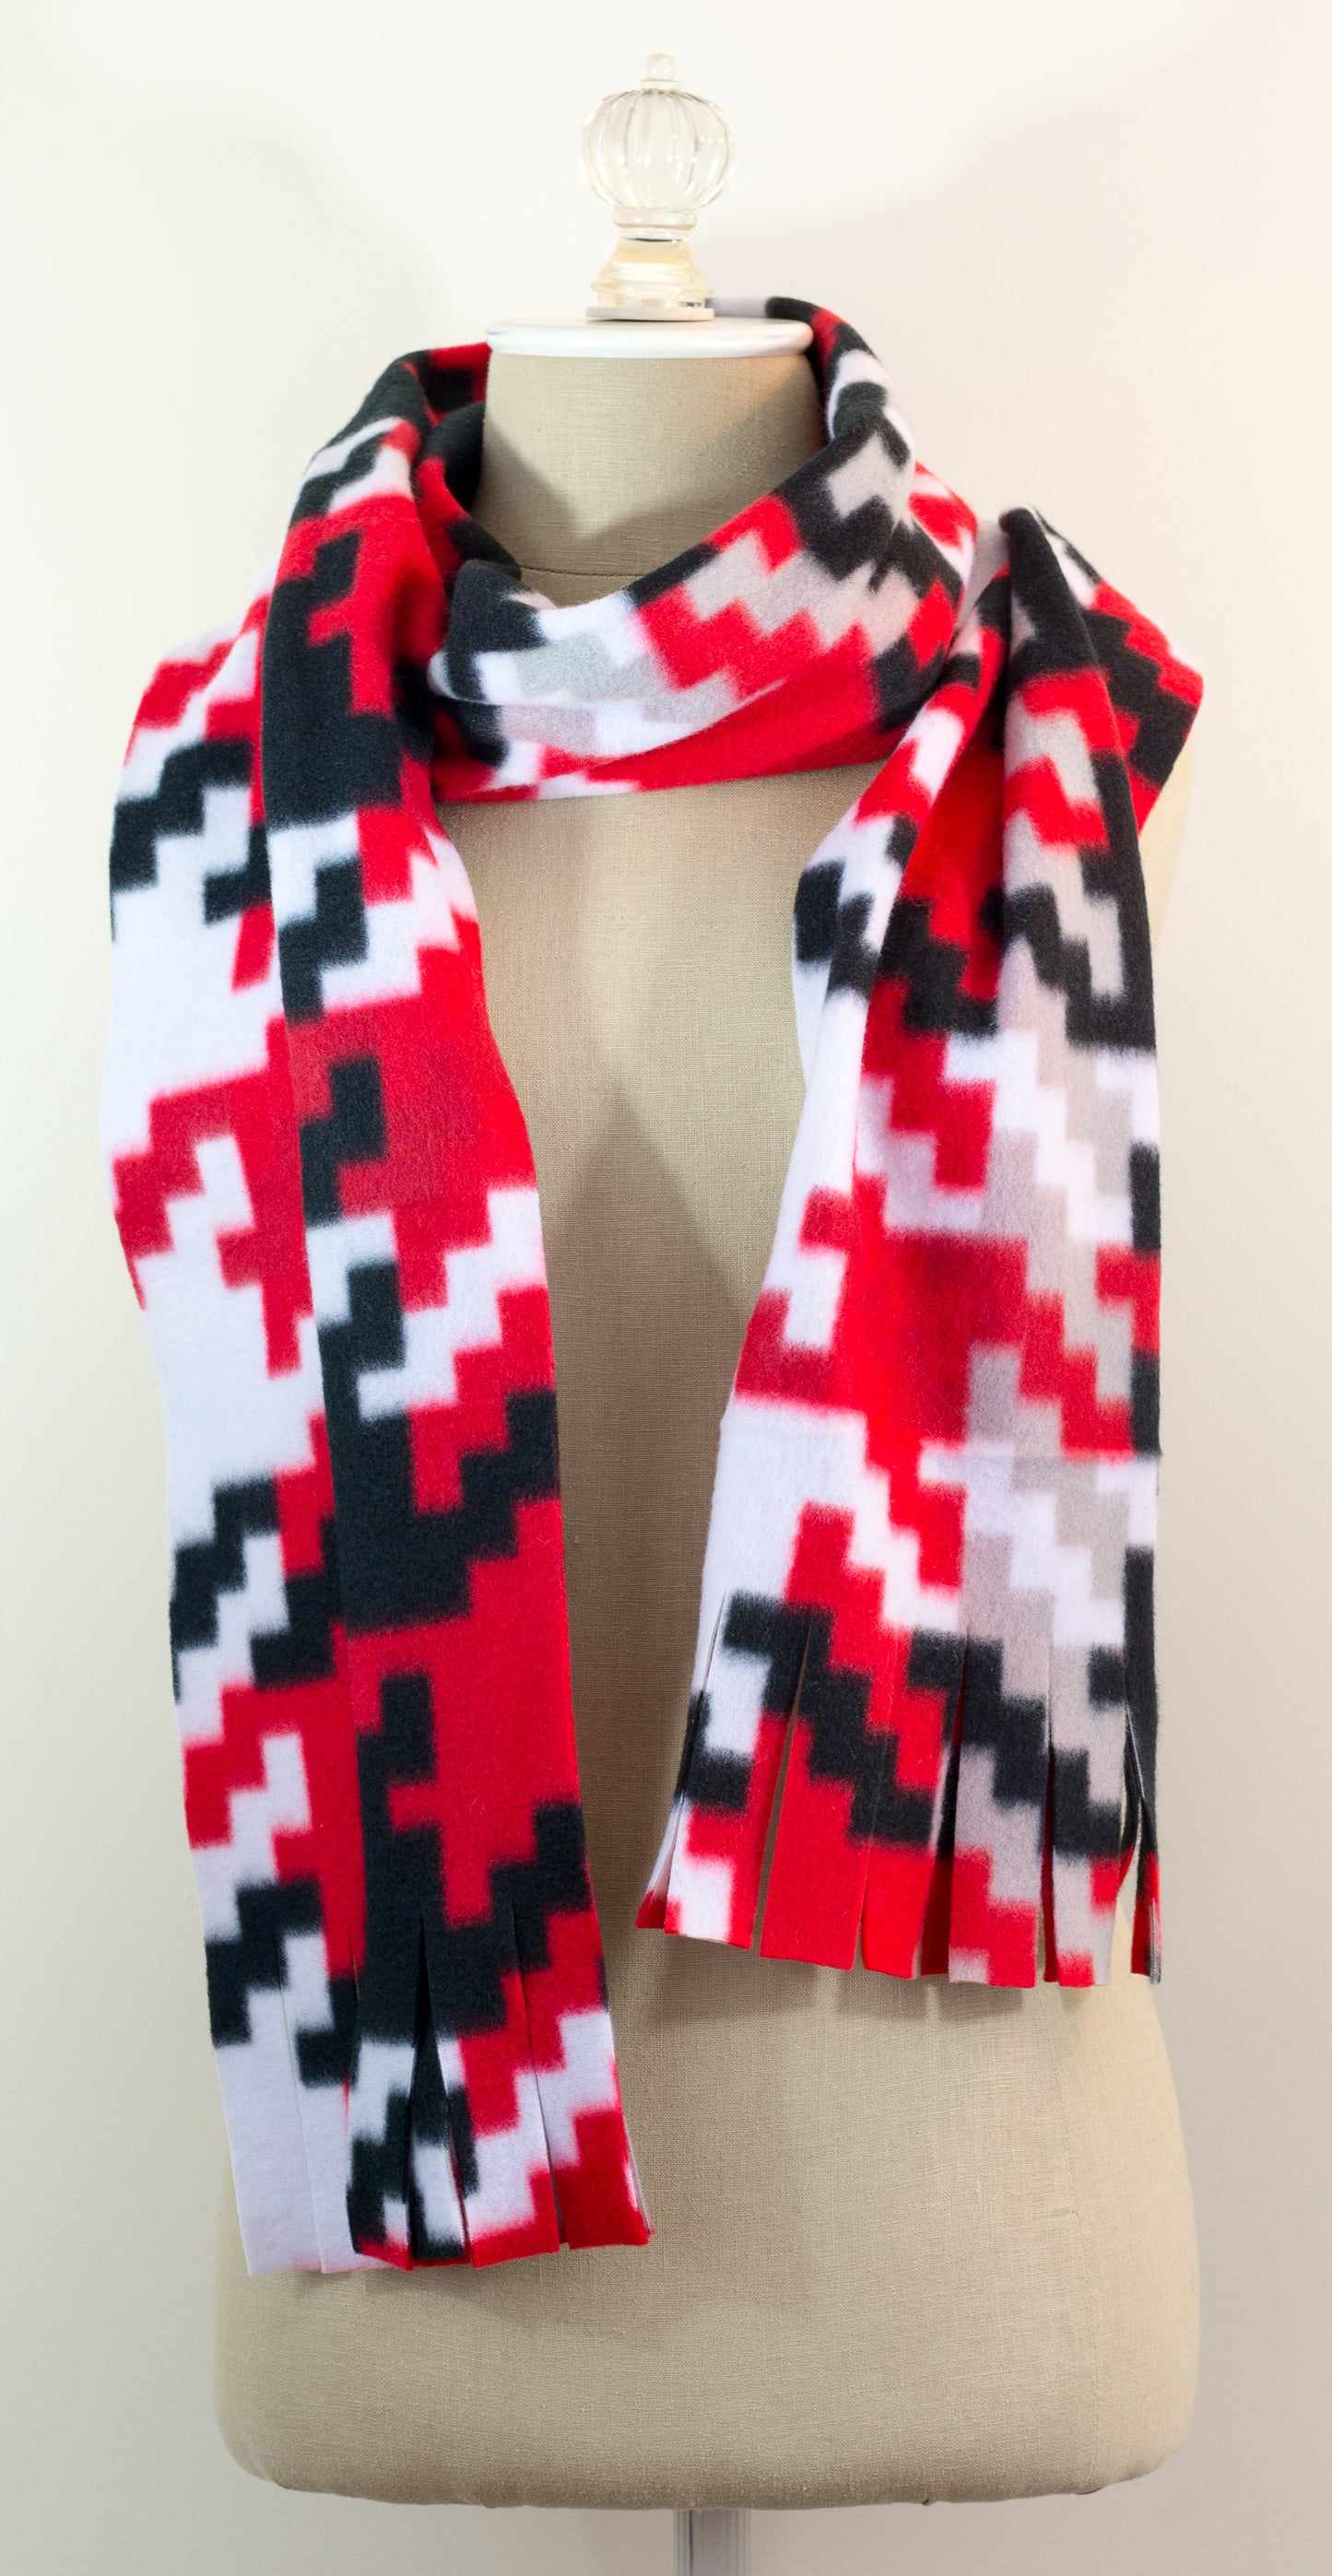 Red, Black, White and Beige Houndstooth Polar Fleece Scarf 10in x 72in Handmade in Maine